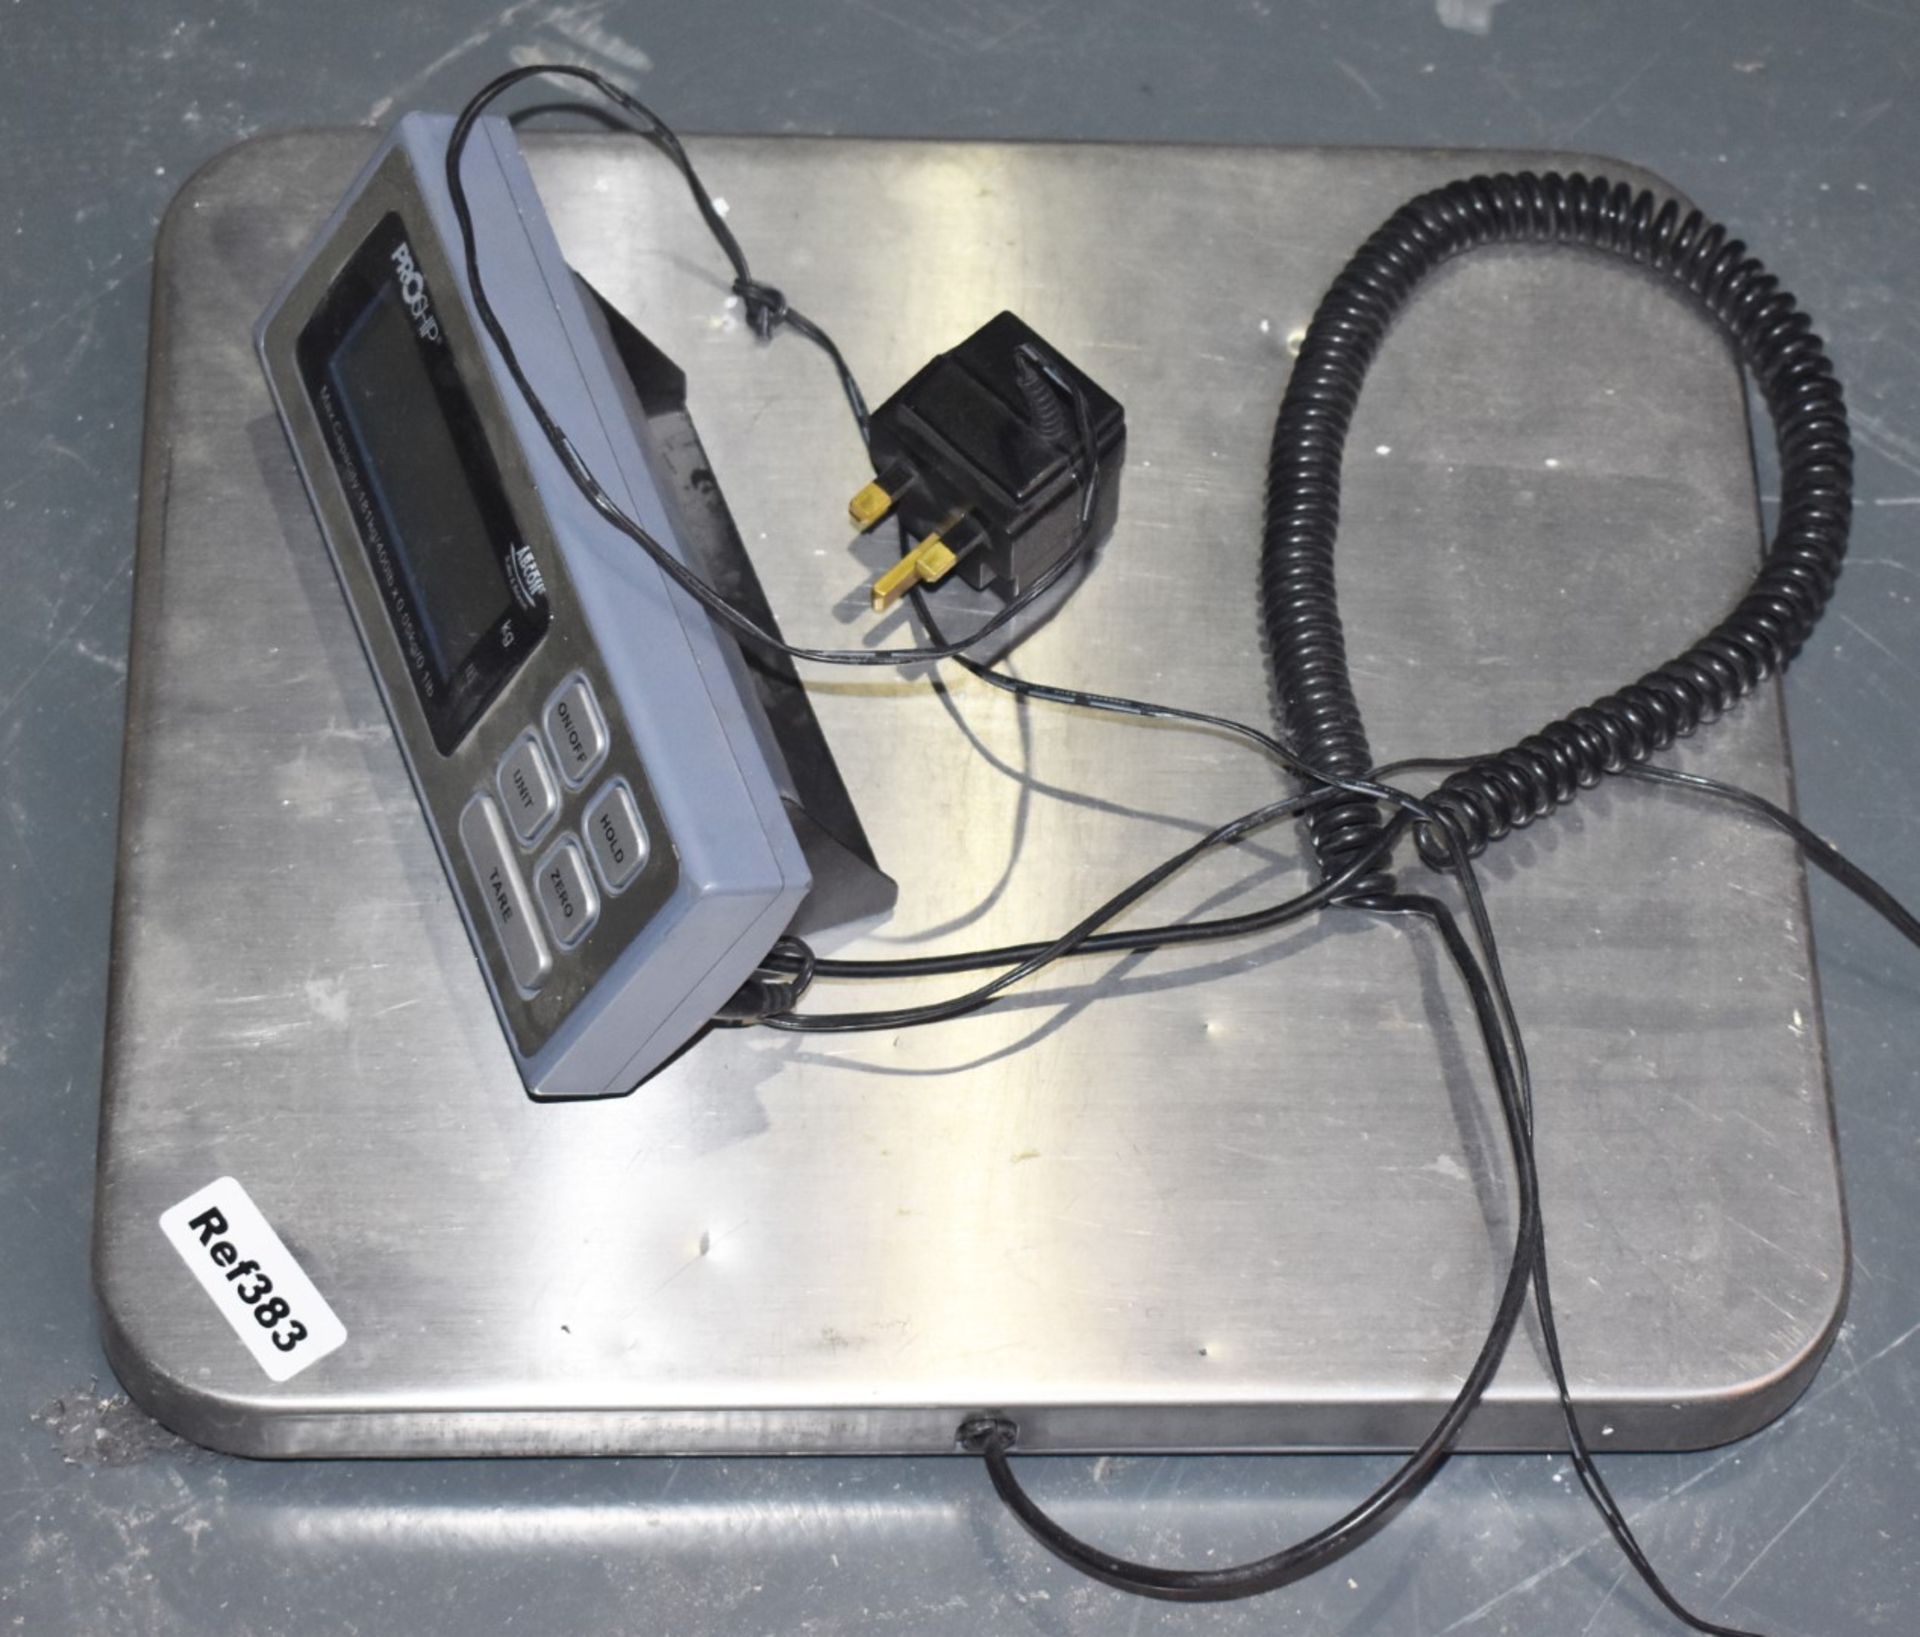 1 x Proship Digital Weighing Scales - Heavy Duty Postal Scales - Ideal For eBay or Amazon - Image 2 of 4